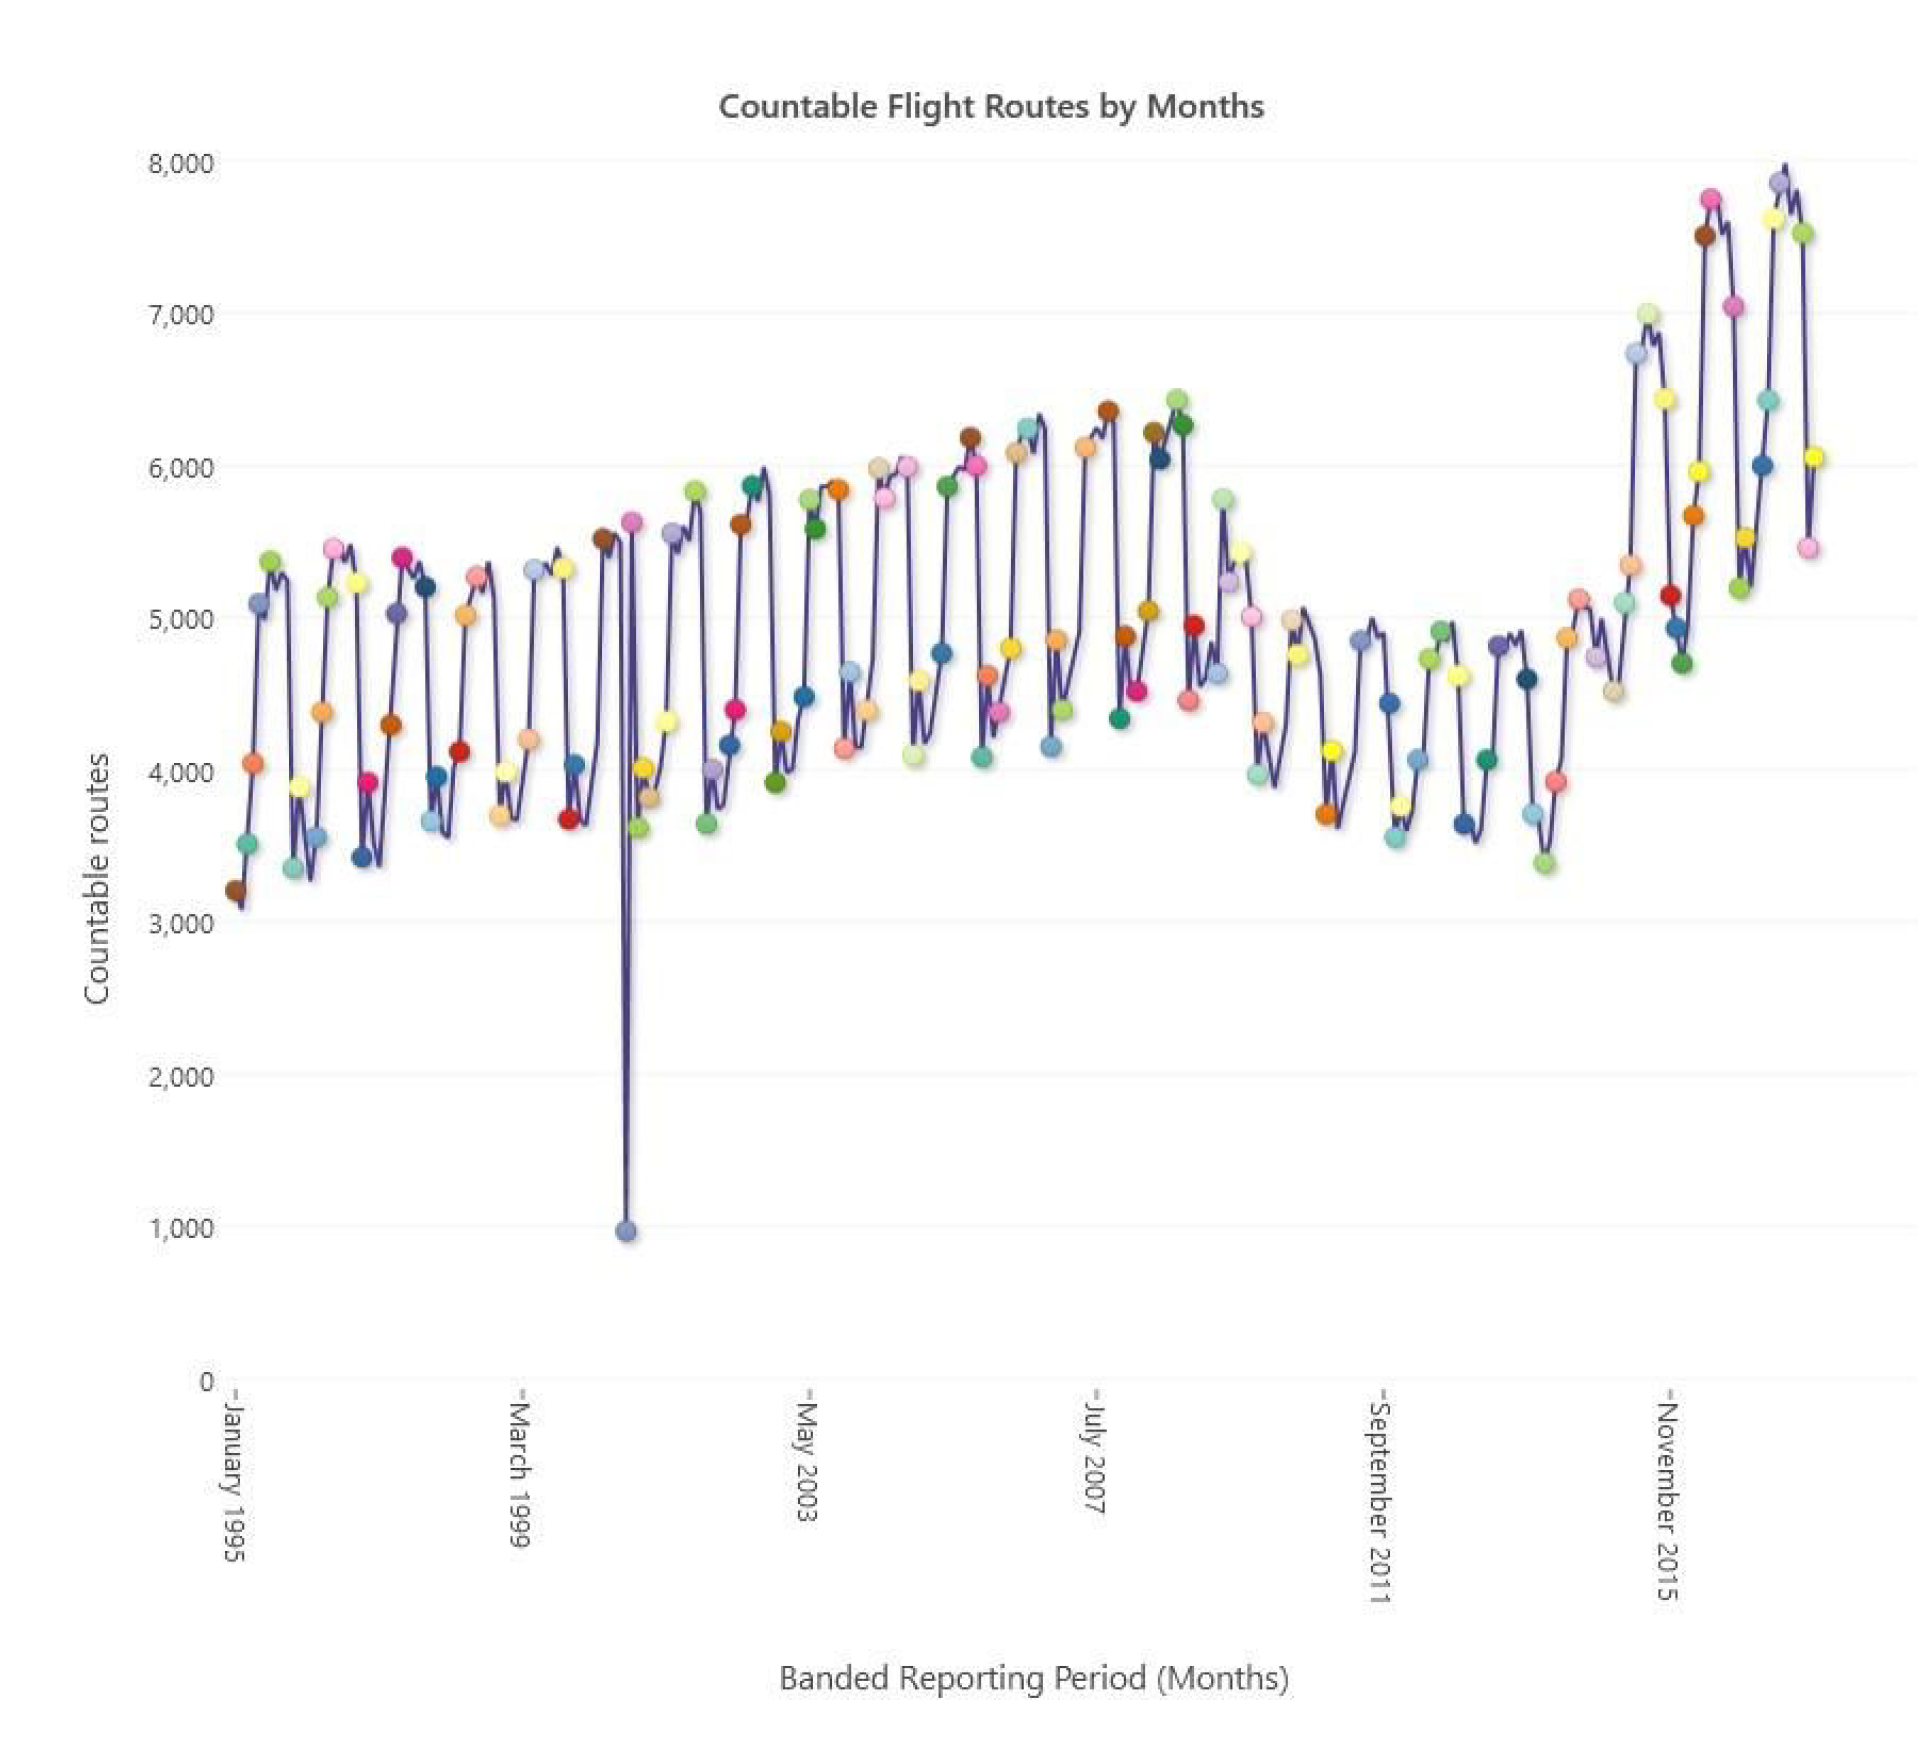 Countable flight routes by month